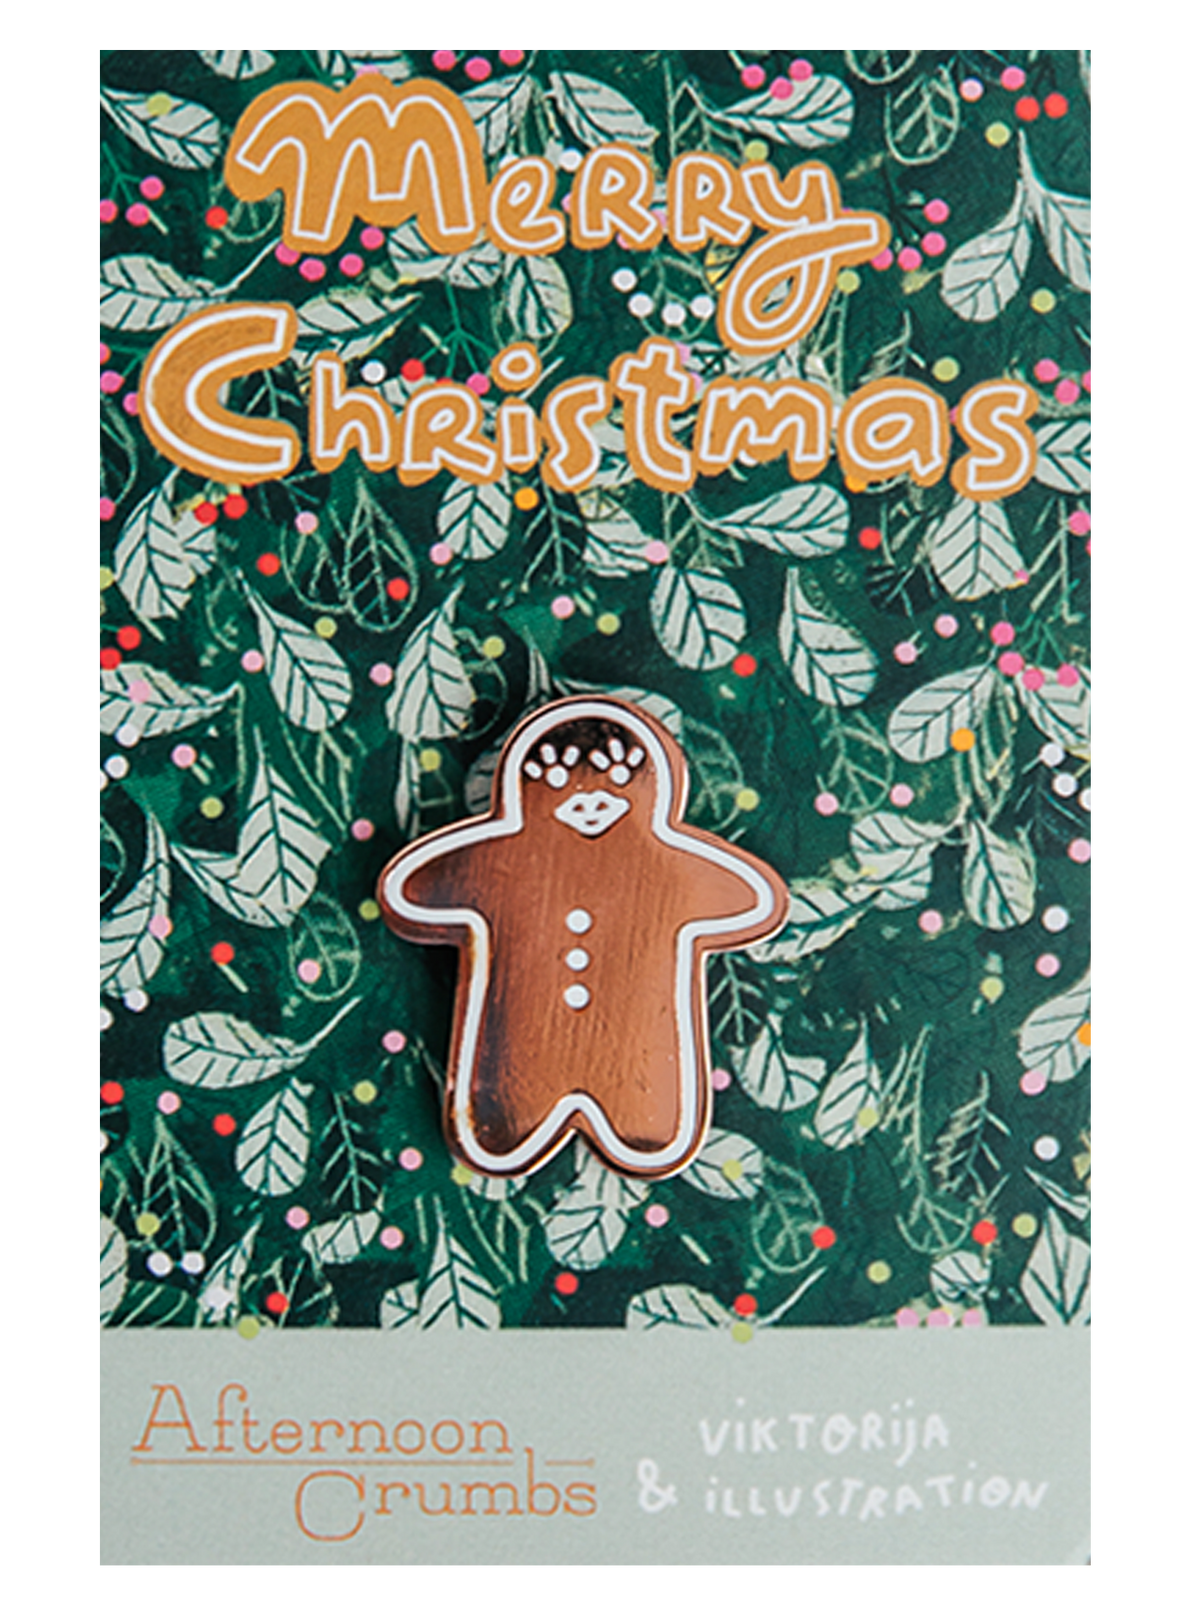 Gingerbread Person Enamel Pin on Illustrated Backer with Merry Christmas Text